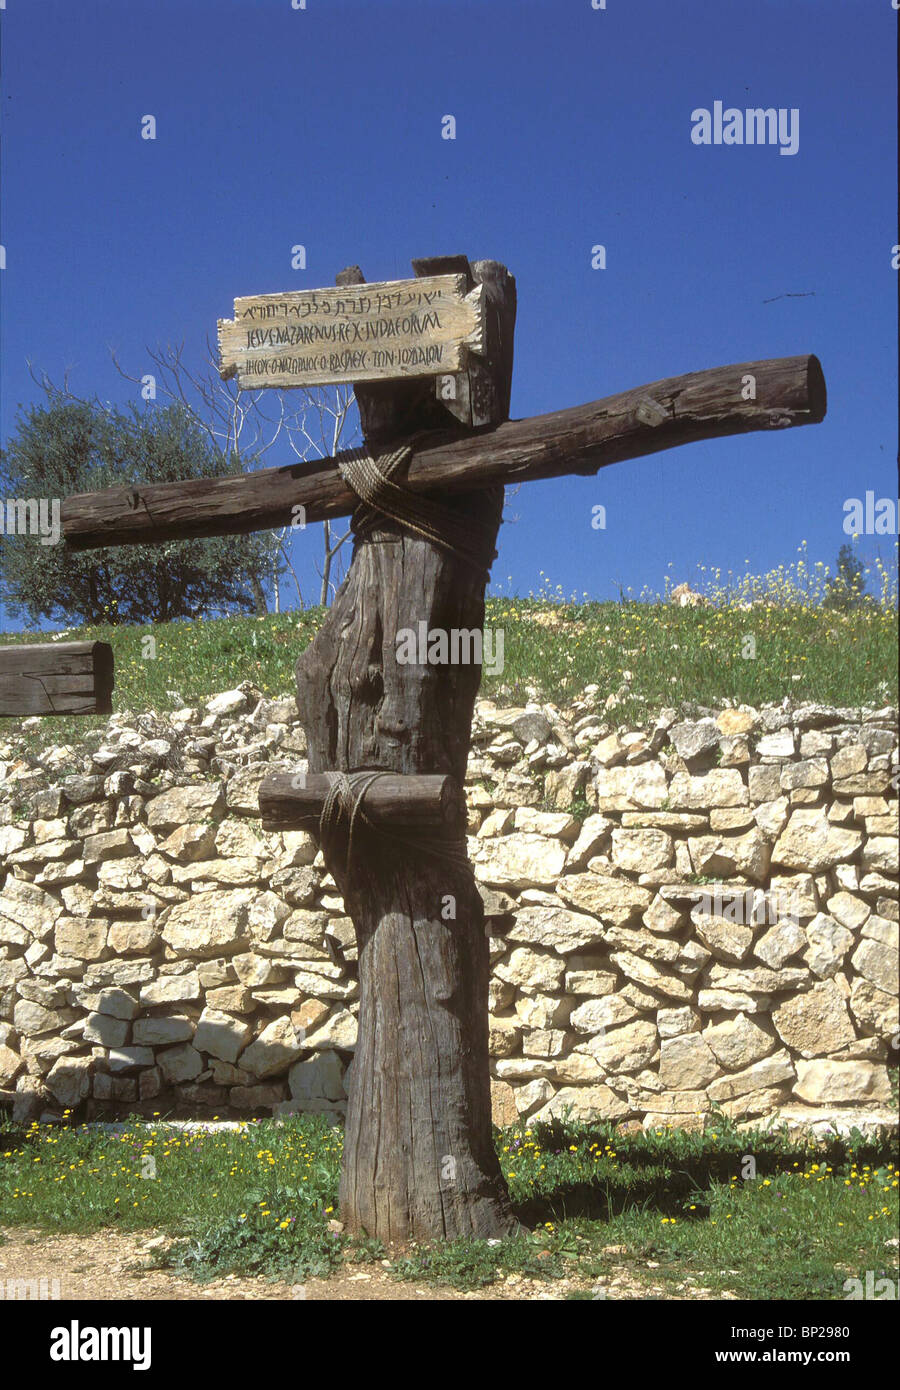 2776. MODEL OF A TYPICAL WOODEN CROSS USED IN THE ROMAN PERIOD, WITH NAMEPLATE ON THE TOP AND TWO WOODEN BEAMS FOR ARMS AND LEGS Stock Photo